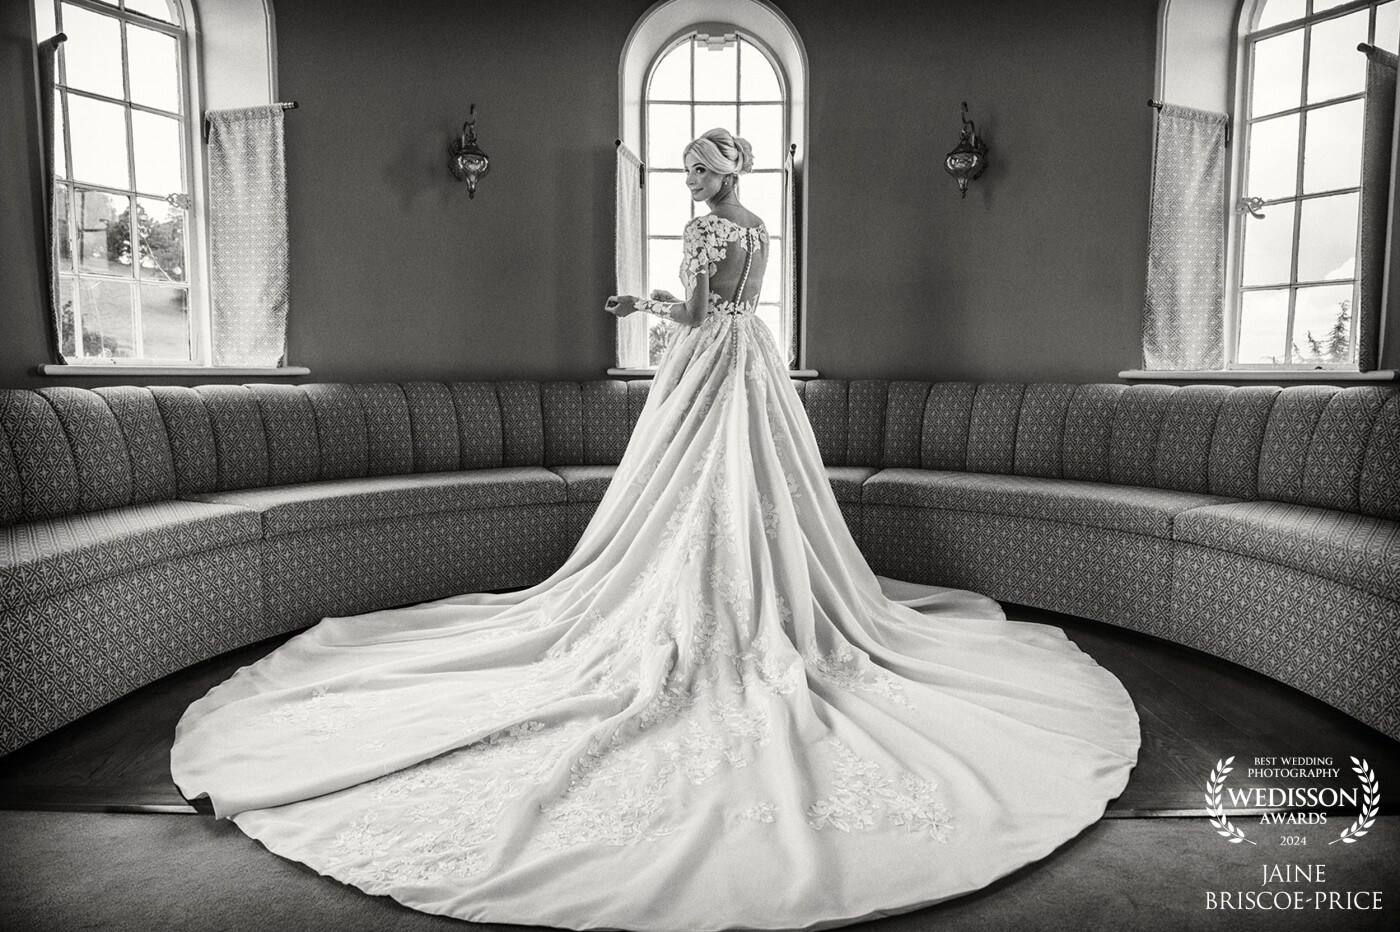 The bridal suite at Hawkstone Hall is simply stunning and when Charlotte put on her dress... well just WOW - if ever someone was born to death "that" dress, it was Charlotte!